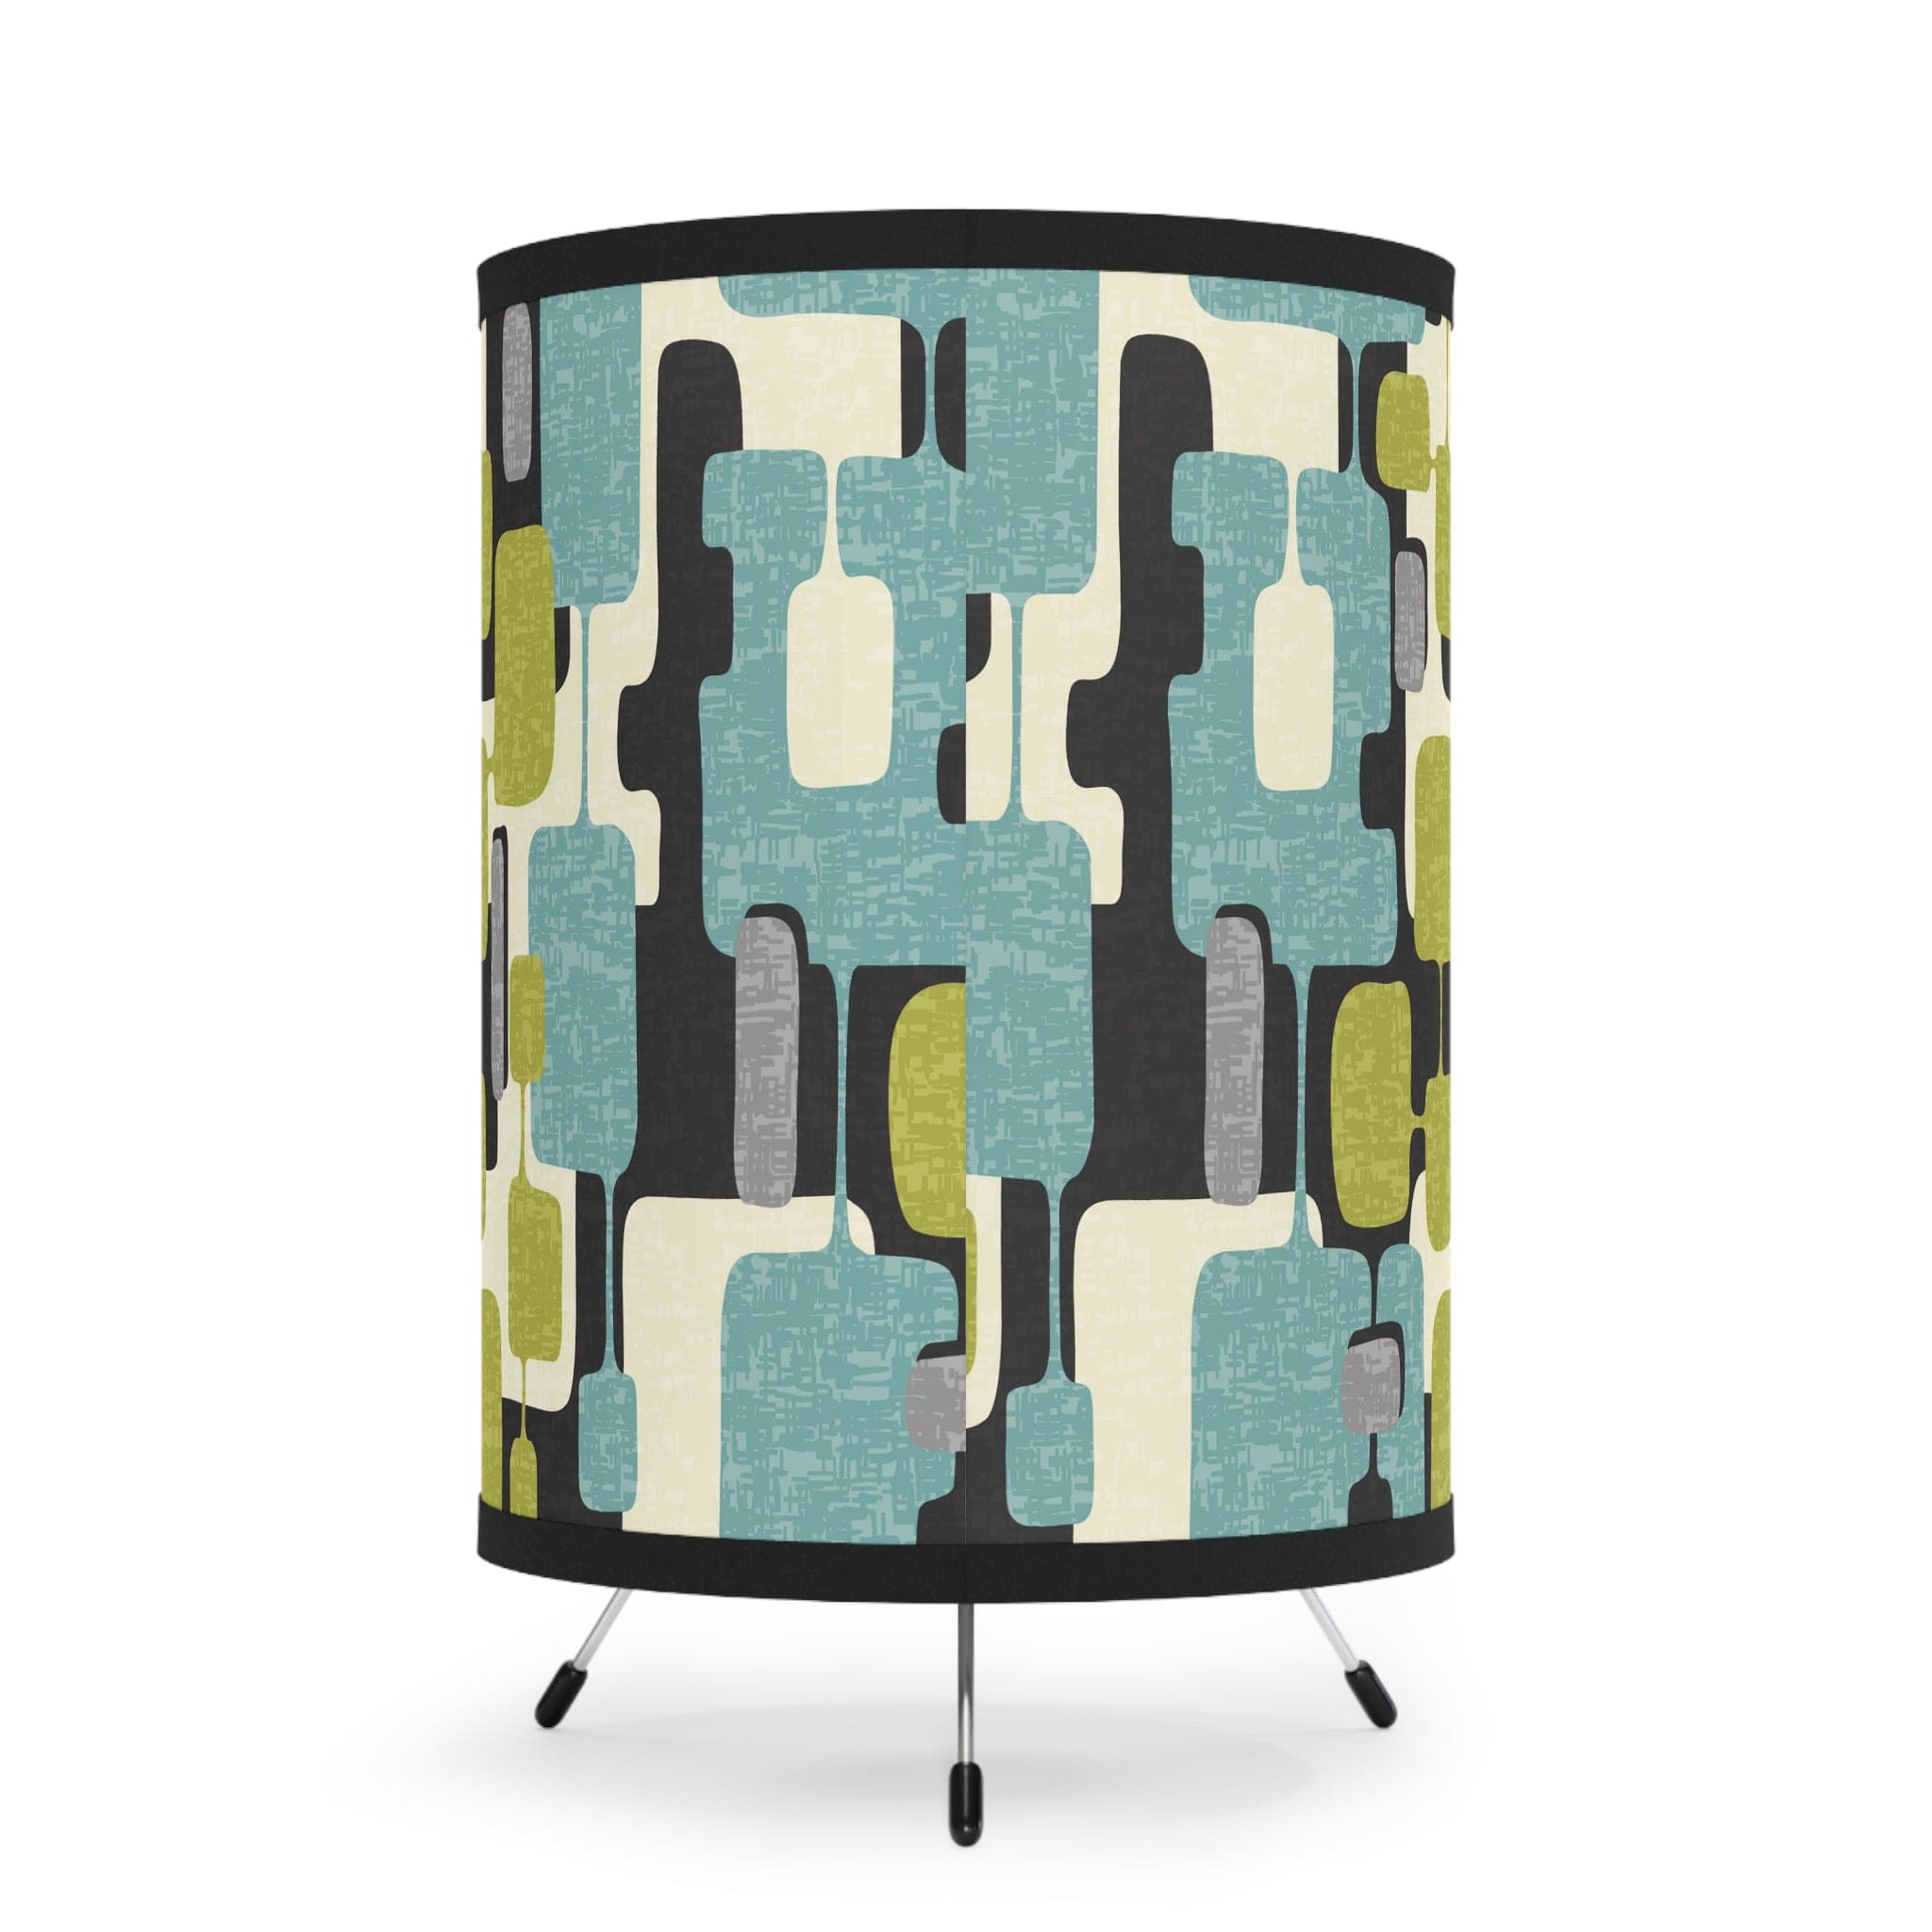 Kate McEnroe New York Mid Century Modern Abstract Tripod Lamp, Retro Teal, Lime Green, Gray, Black MCM Desk Lamp, Vintage Style Geometric Accent Lamp Lamps One size / Black 23244726713903750746